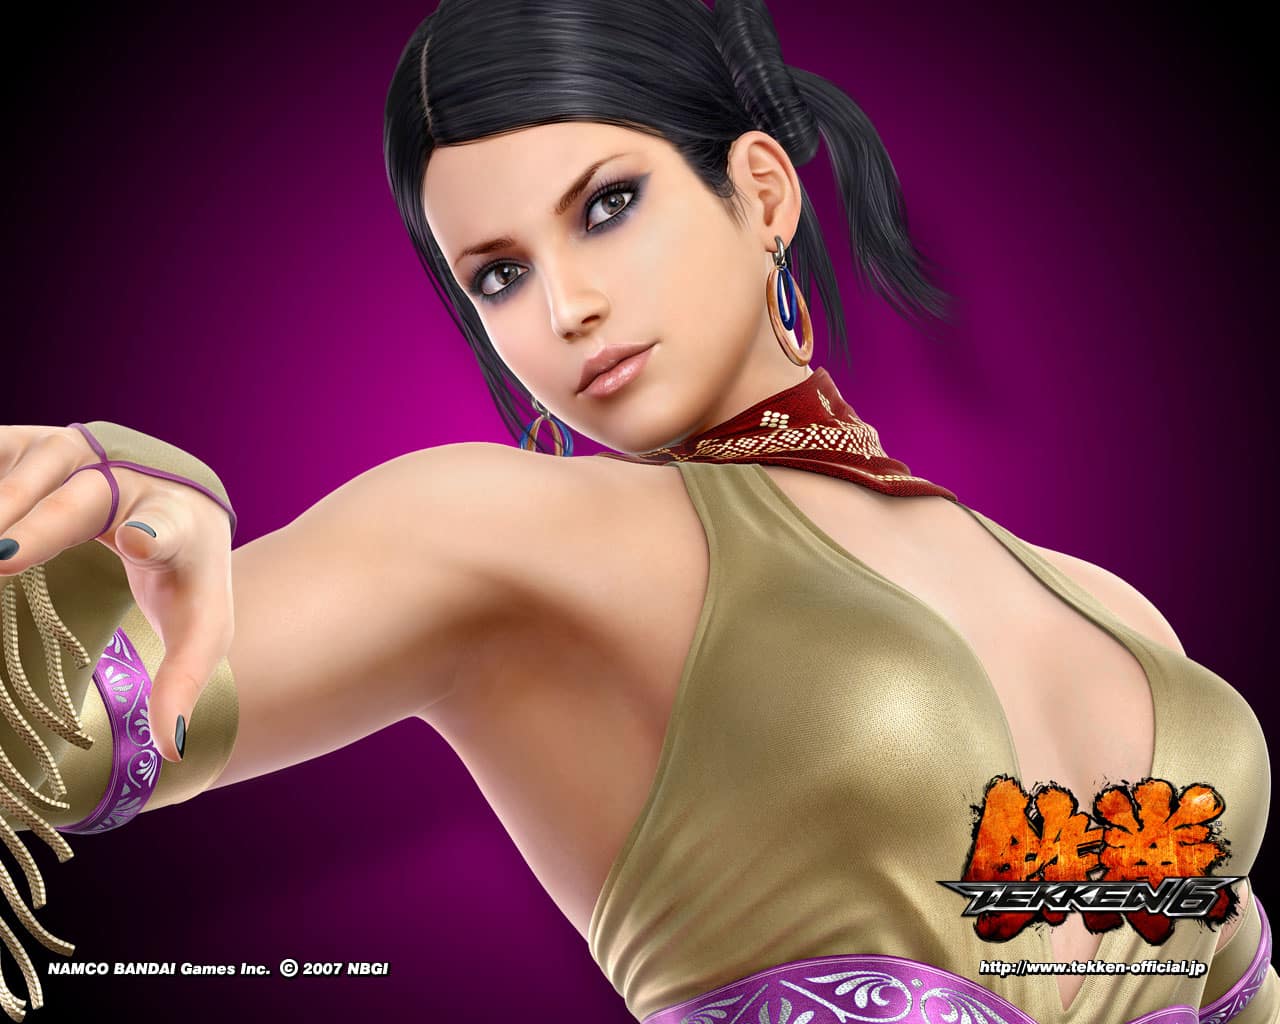 For more artwork, don't forget to check out our official Tekken 6 characters 